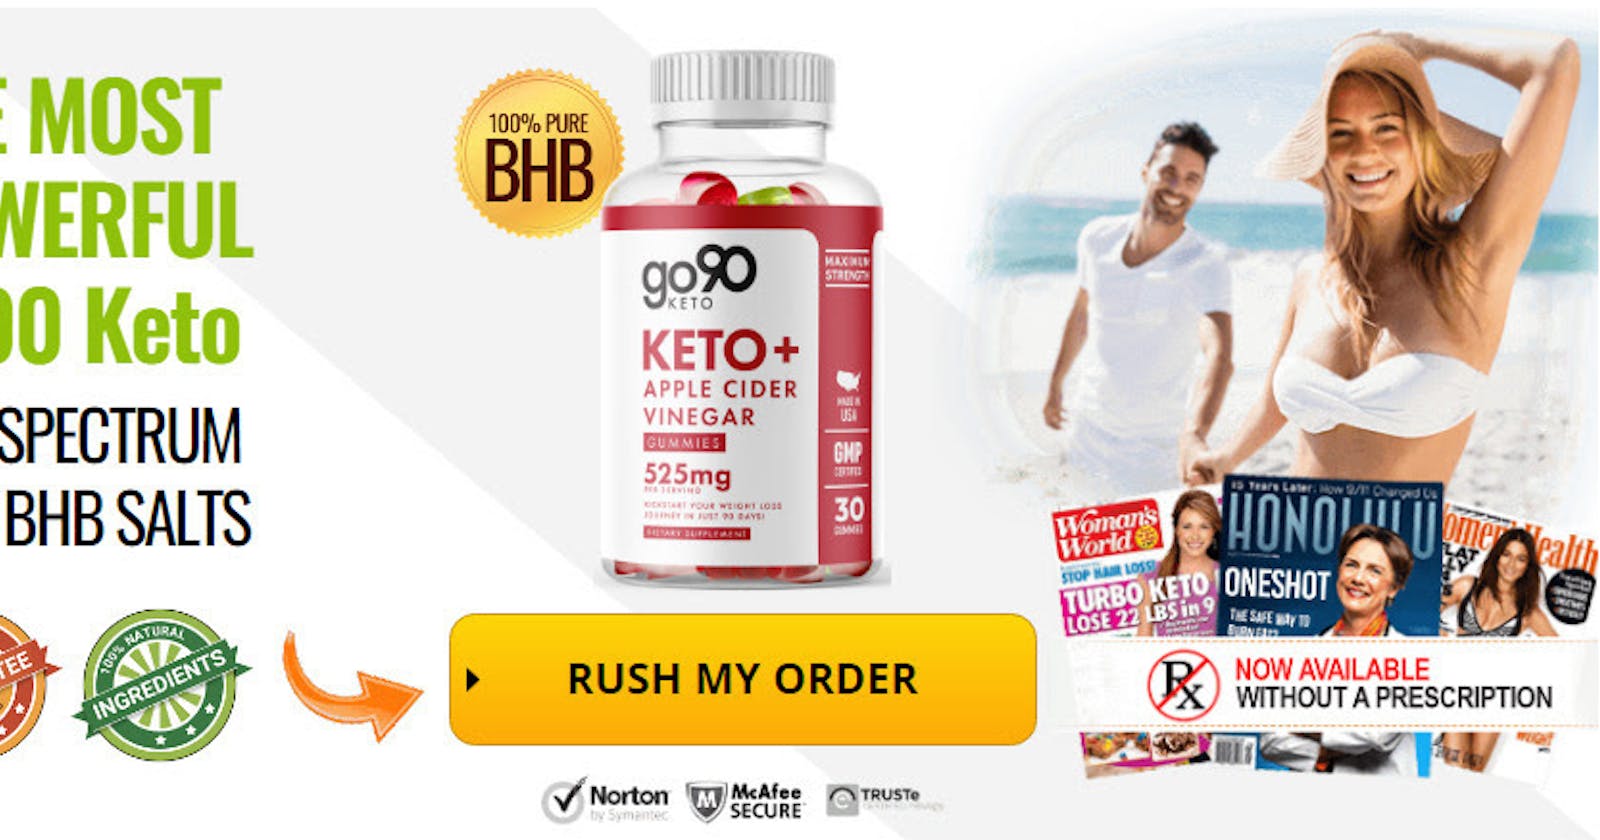 Go90 Keto+ACV Gummies For Weight Loss: 10 Top Products That Really Work?